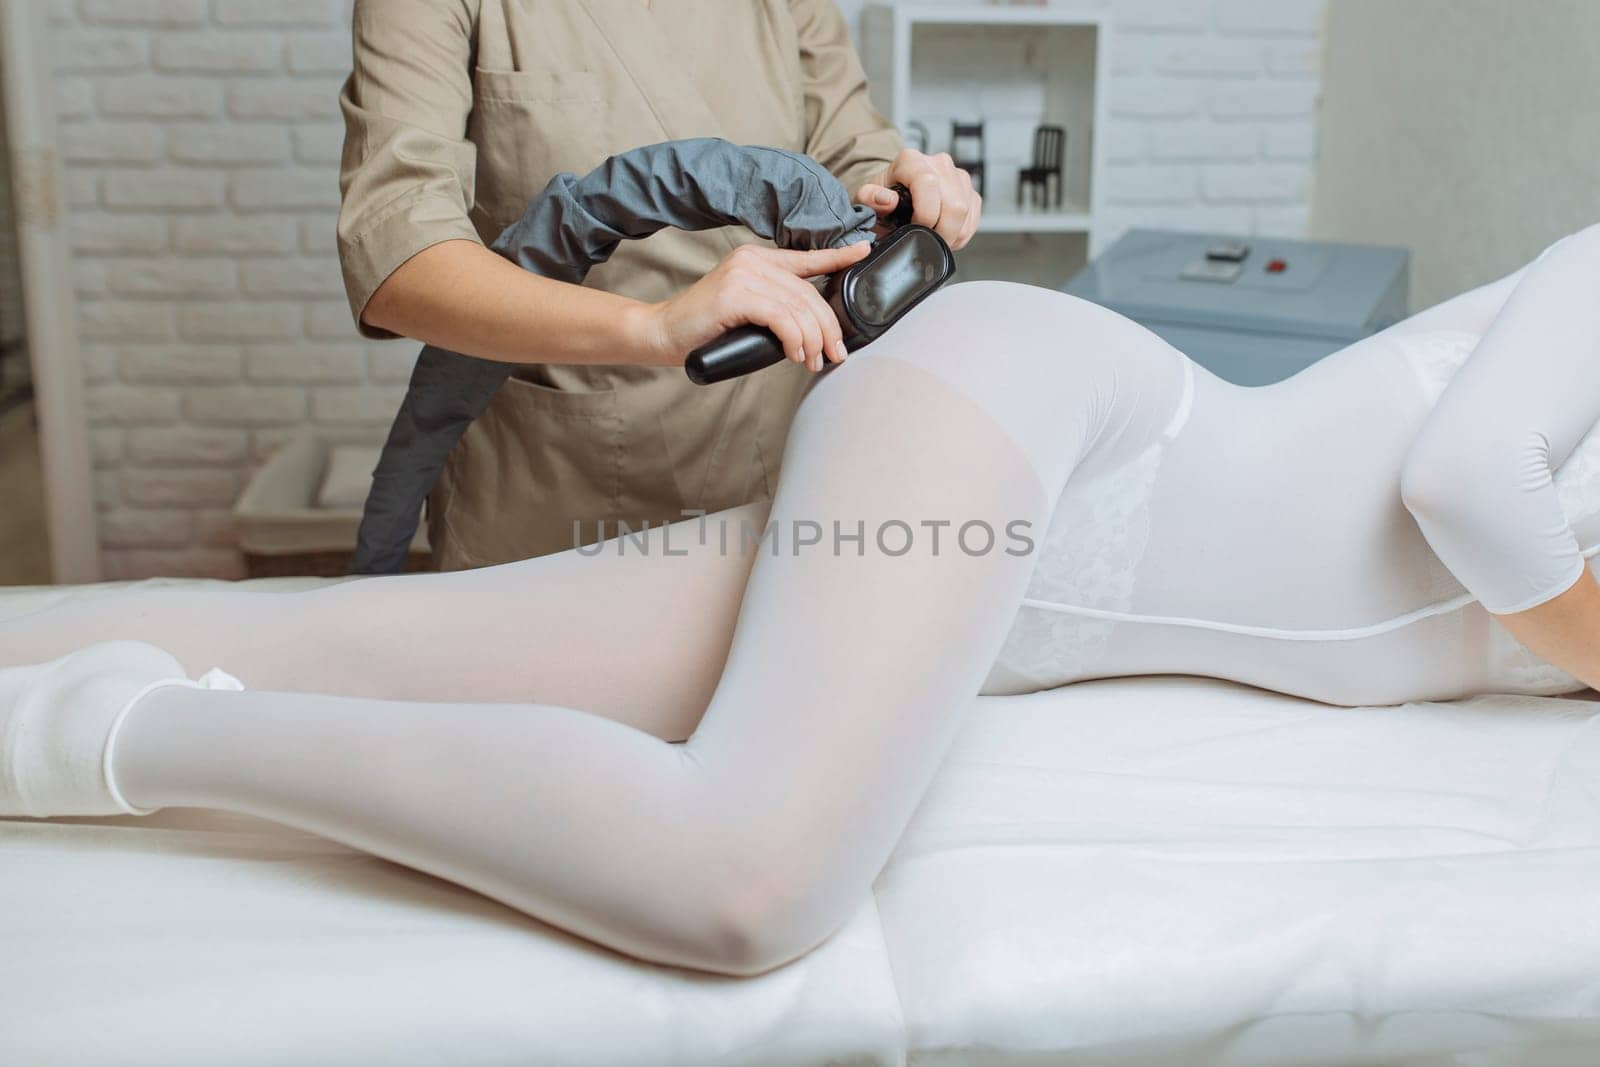 Beautiful woman getting beauty therapy against cellulite with LPG machine on her butt. LPG massage for lifting body